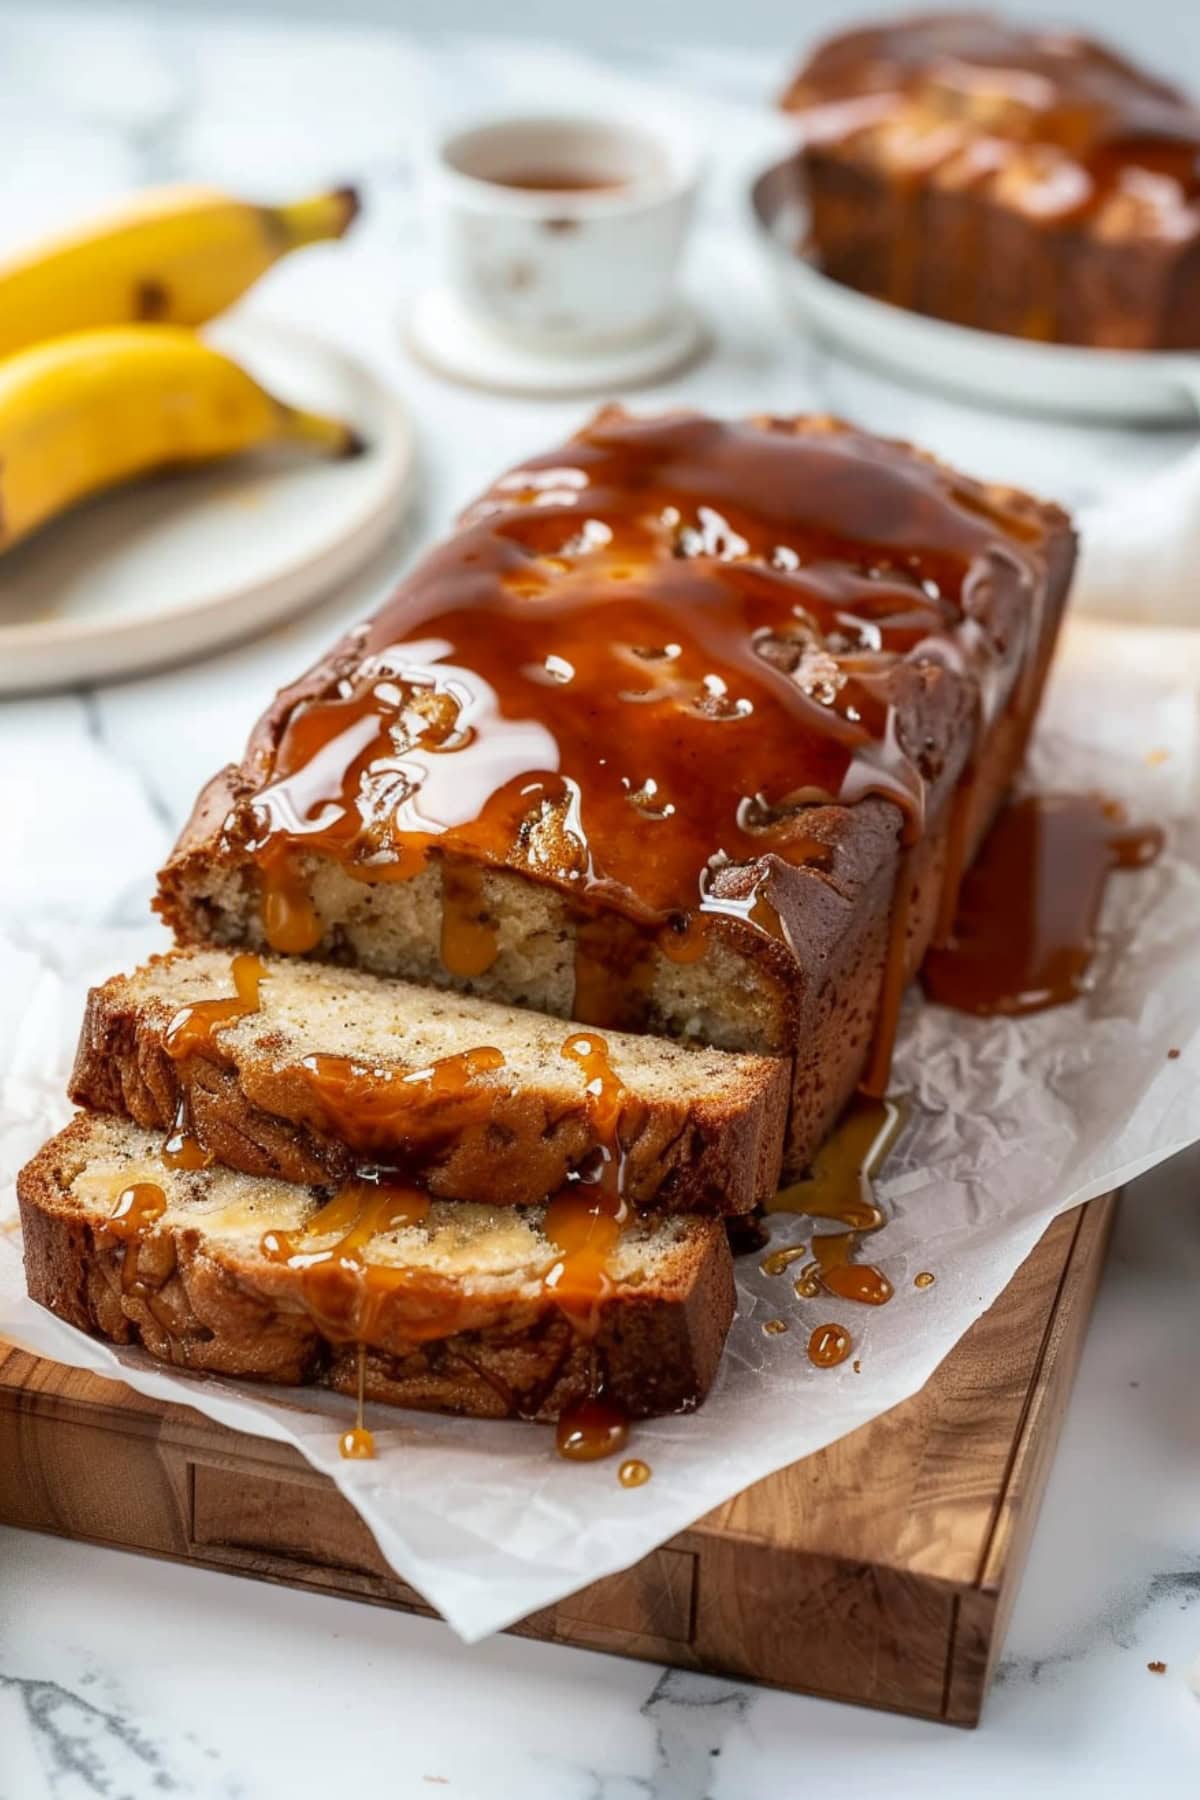 Sliced banana bread with caramel drizzle on top on a wooden board with parchment paper.